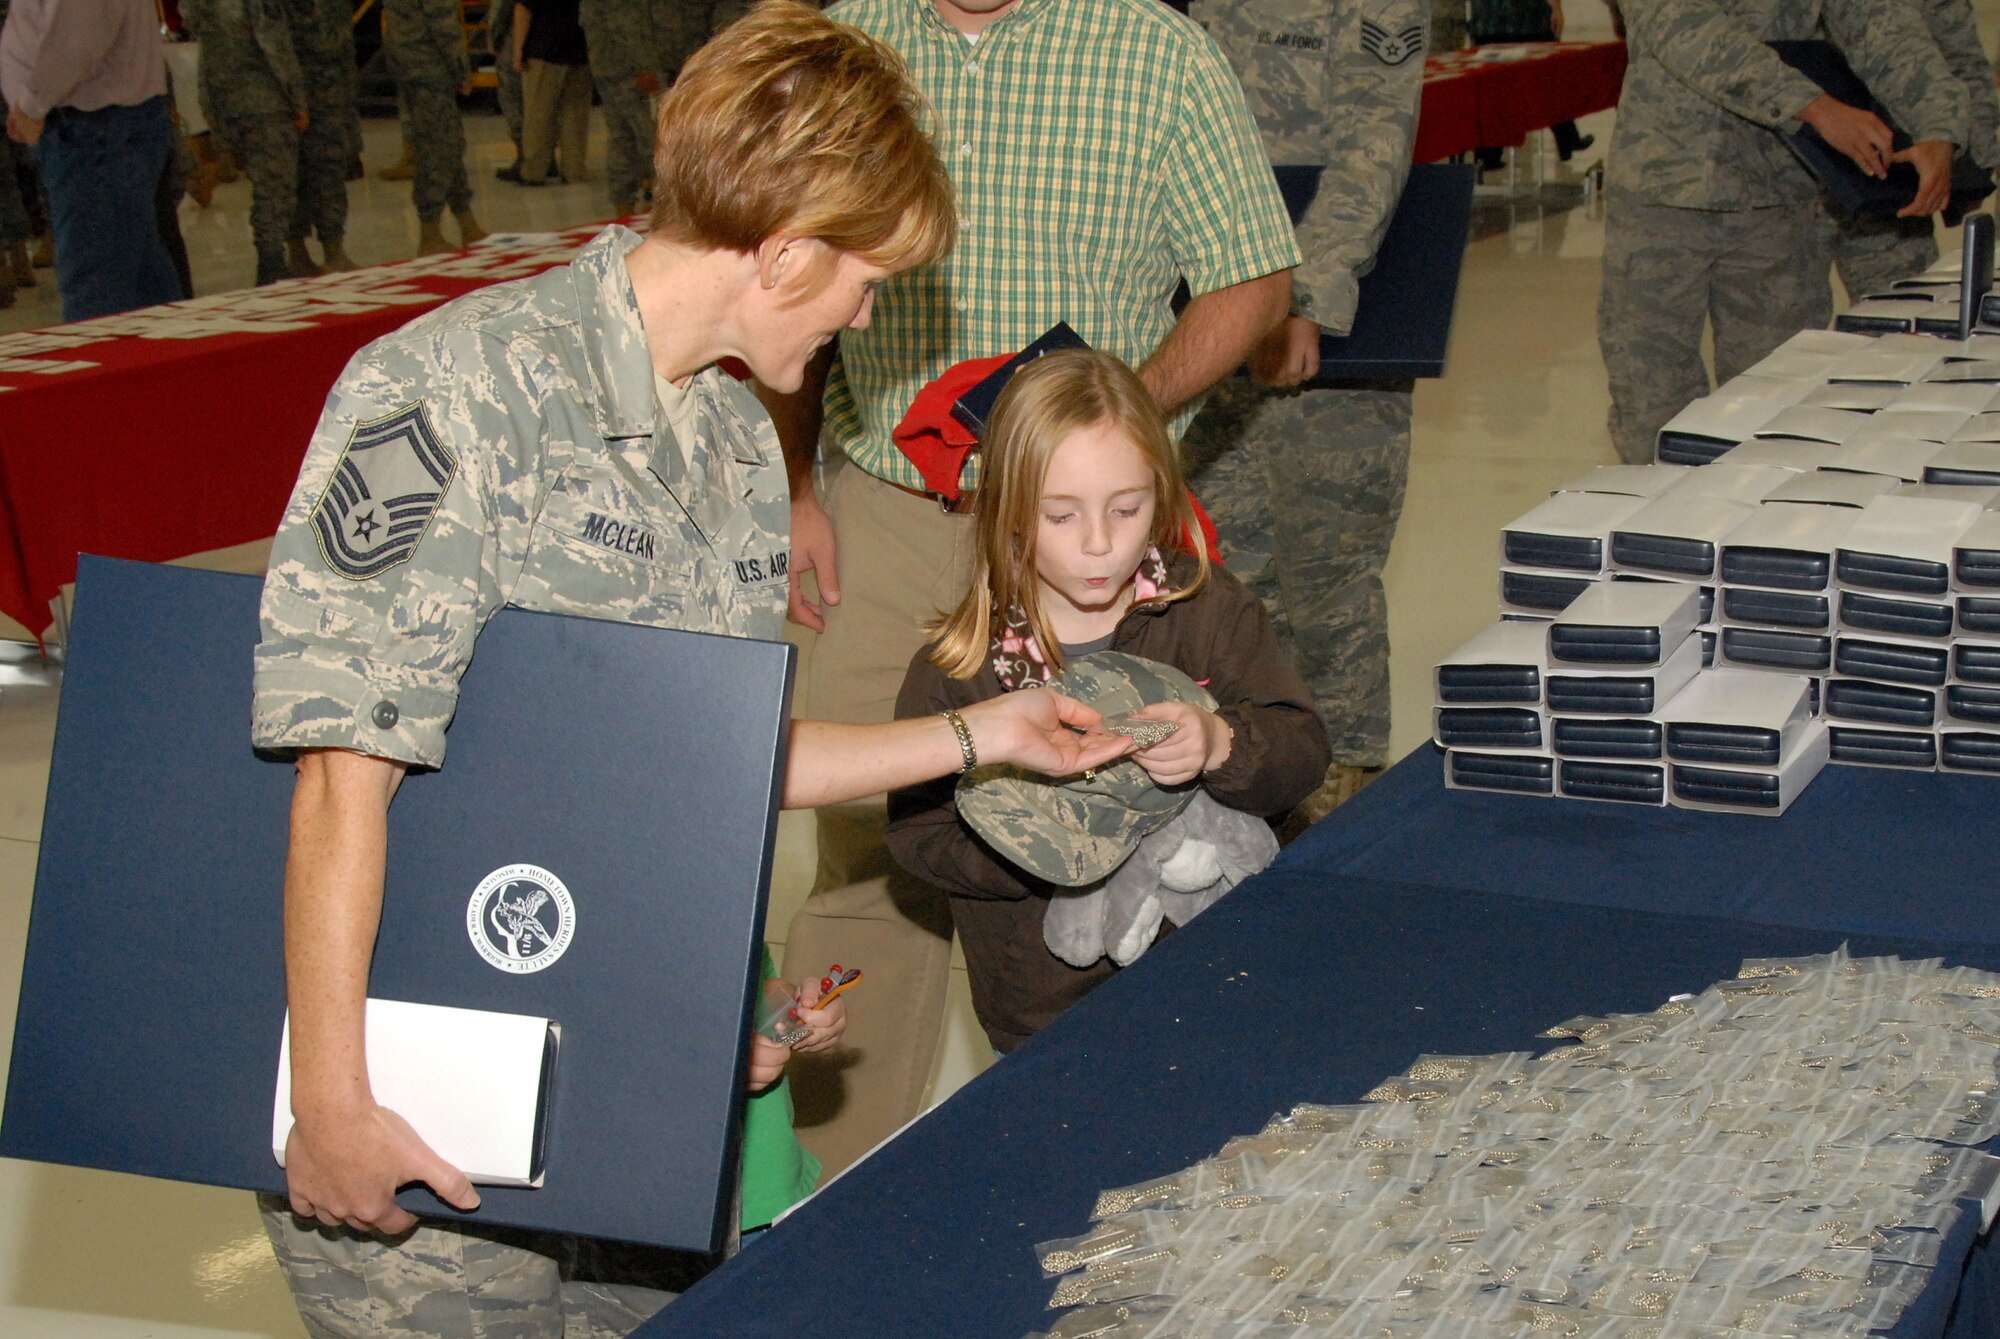 Senior Master Sgt. Sheri Mclean, 115th Fighter Wing, presents her daughter a set of Hometown Heroes Salute commemorative dog tags as a token of the National Guard's appreciation at a recent Hometown Heroes Salute ceremony at Truax Field in Madison, Wis. The ceremony included more than 350 members of the 115th Fighter Wing at the unit's first-ever Hometown Heroes Salute ceremony.  The National Guard program honors recognizes Airmen who deployed for more than 30 consecutive days for Operations Noble Eagle, Enduring Freedom and Iraqi Freedom and all other contingency operations.  Airman's families and centers of influence were also recognized. (U.S. Air Force photo by Tech. Sgt. Ashley Bell)